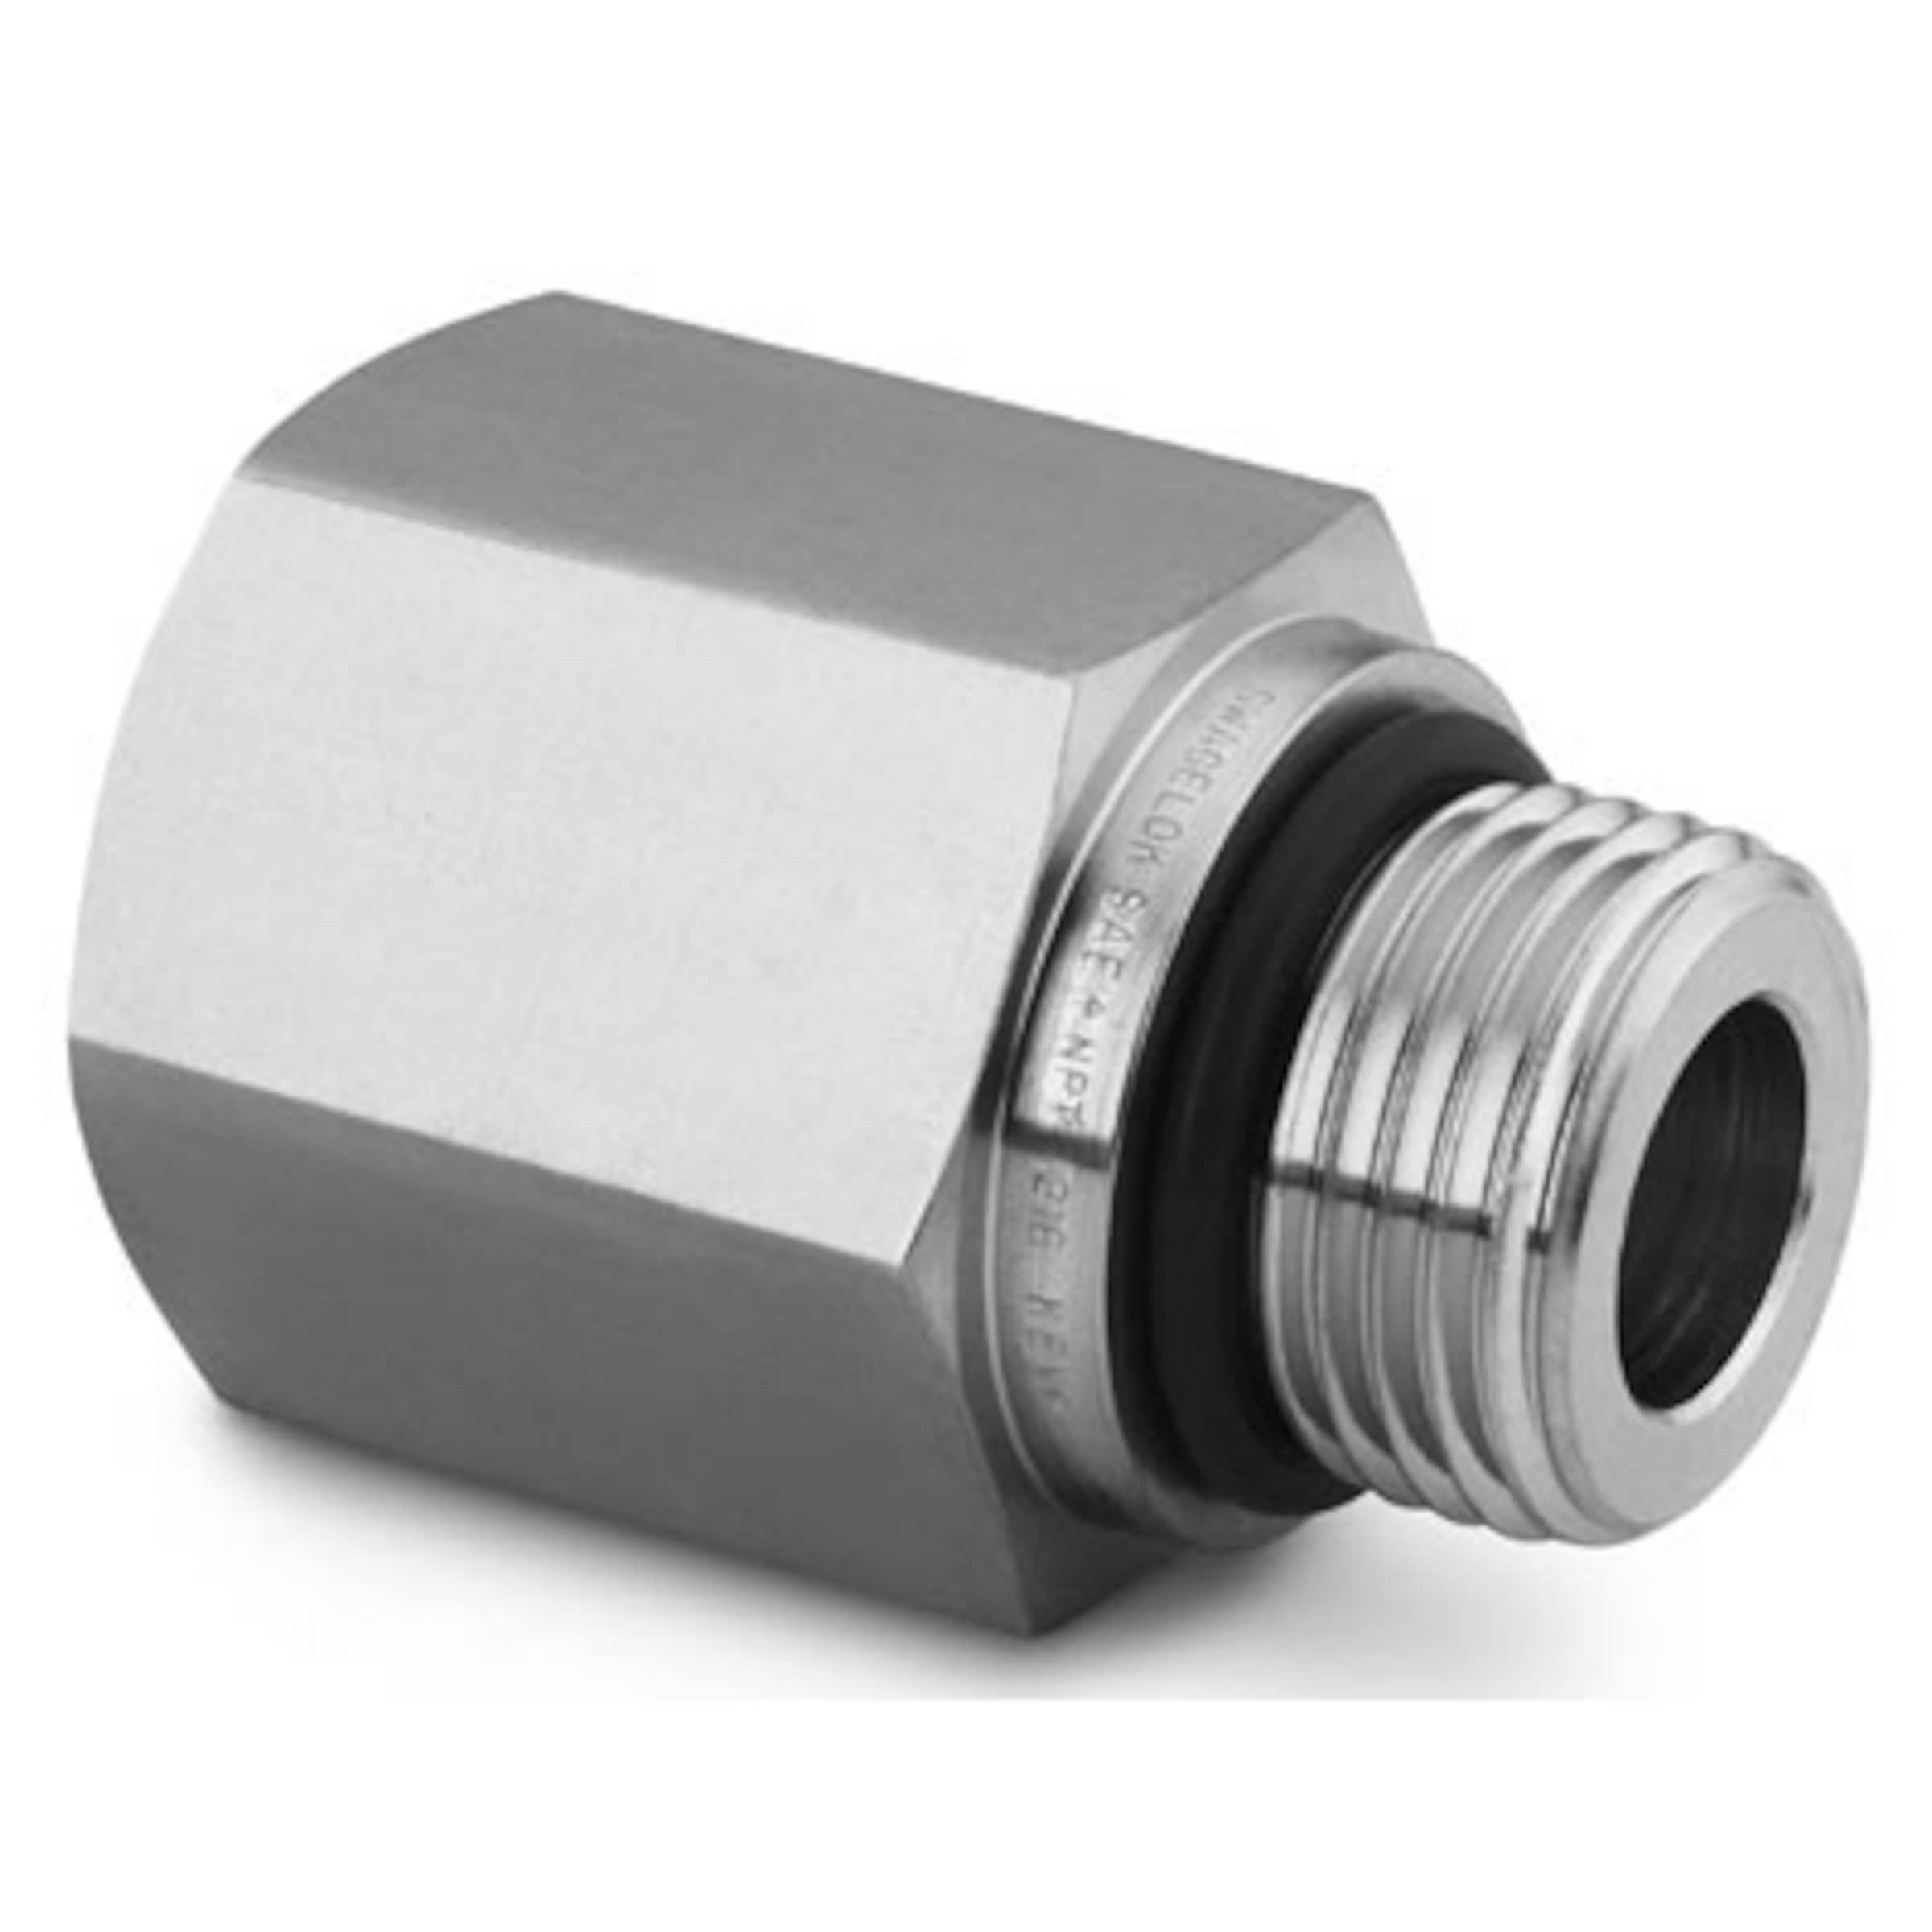 9/16-18 JIC Thread x 1/2-14 Male BSPP Midland 7802-6 Steel Pipe Connector 